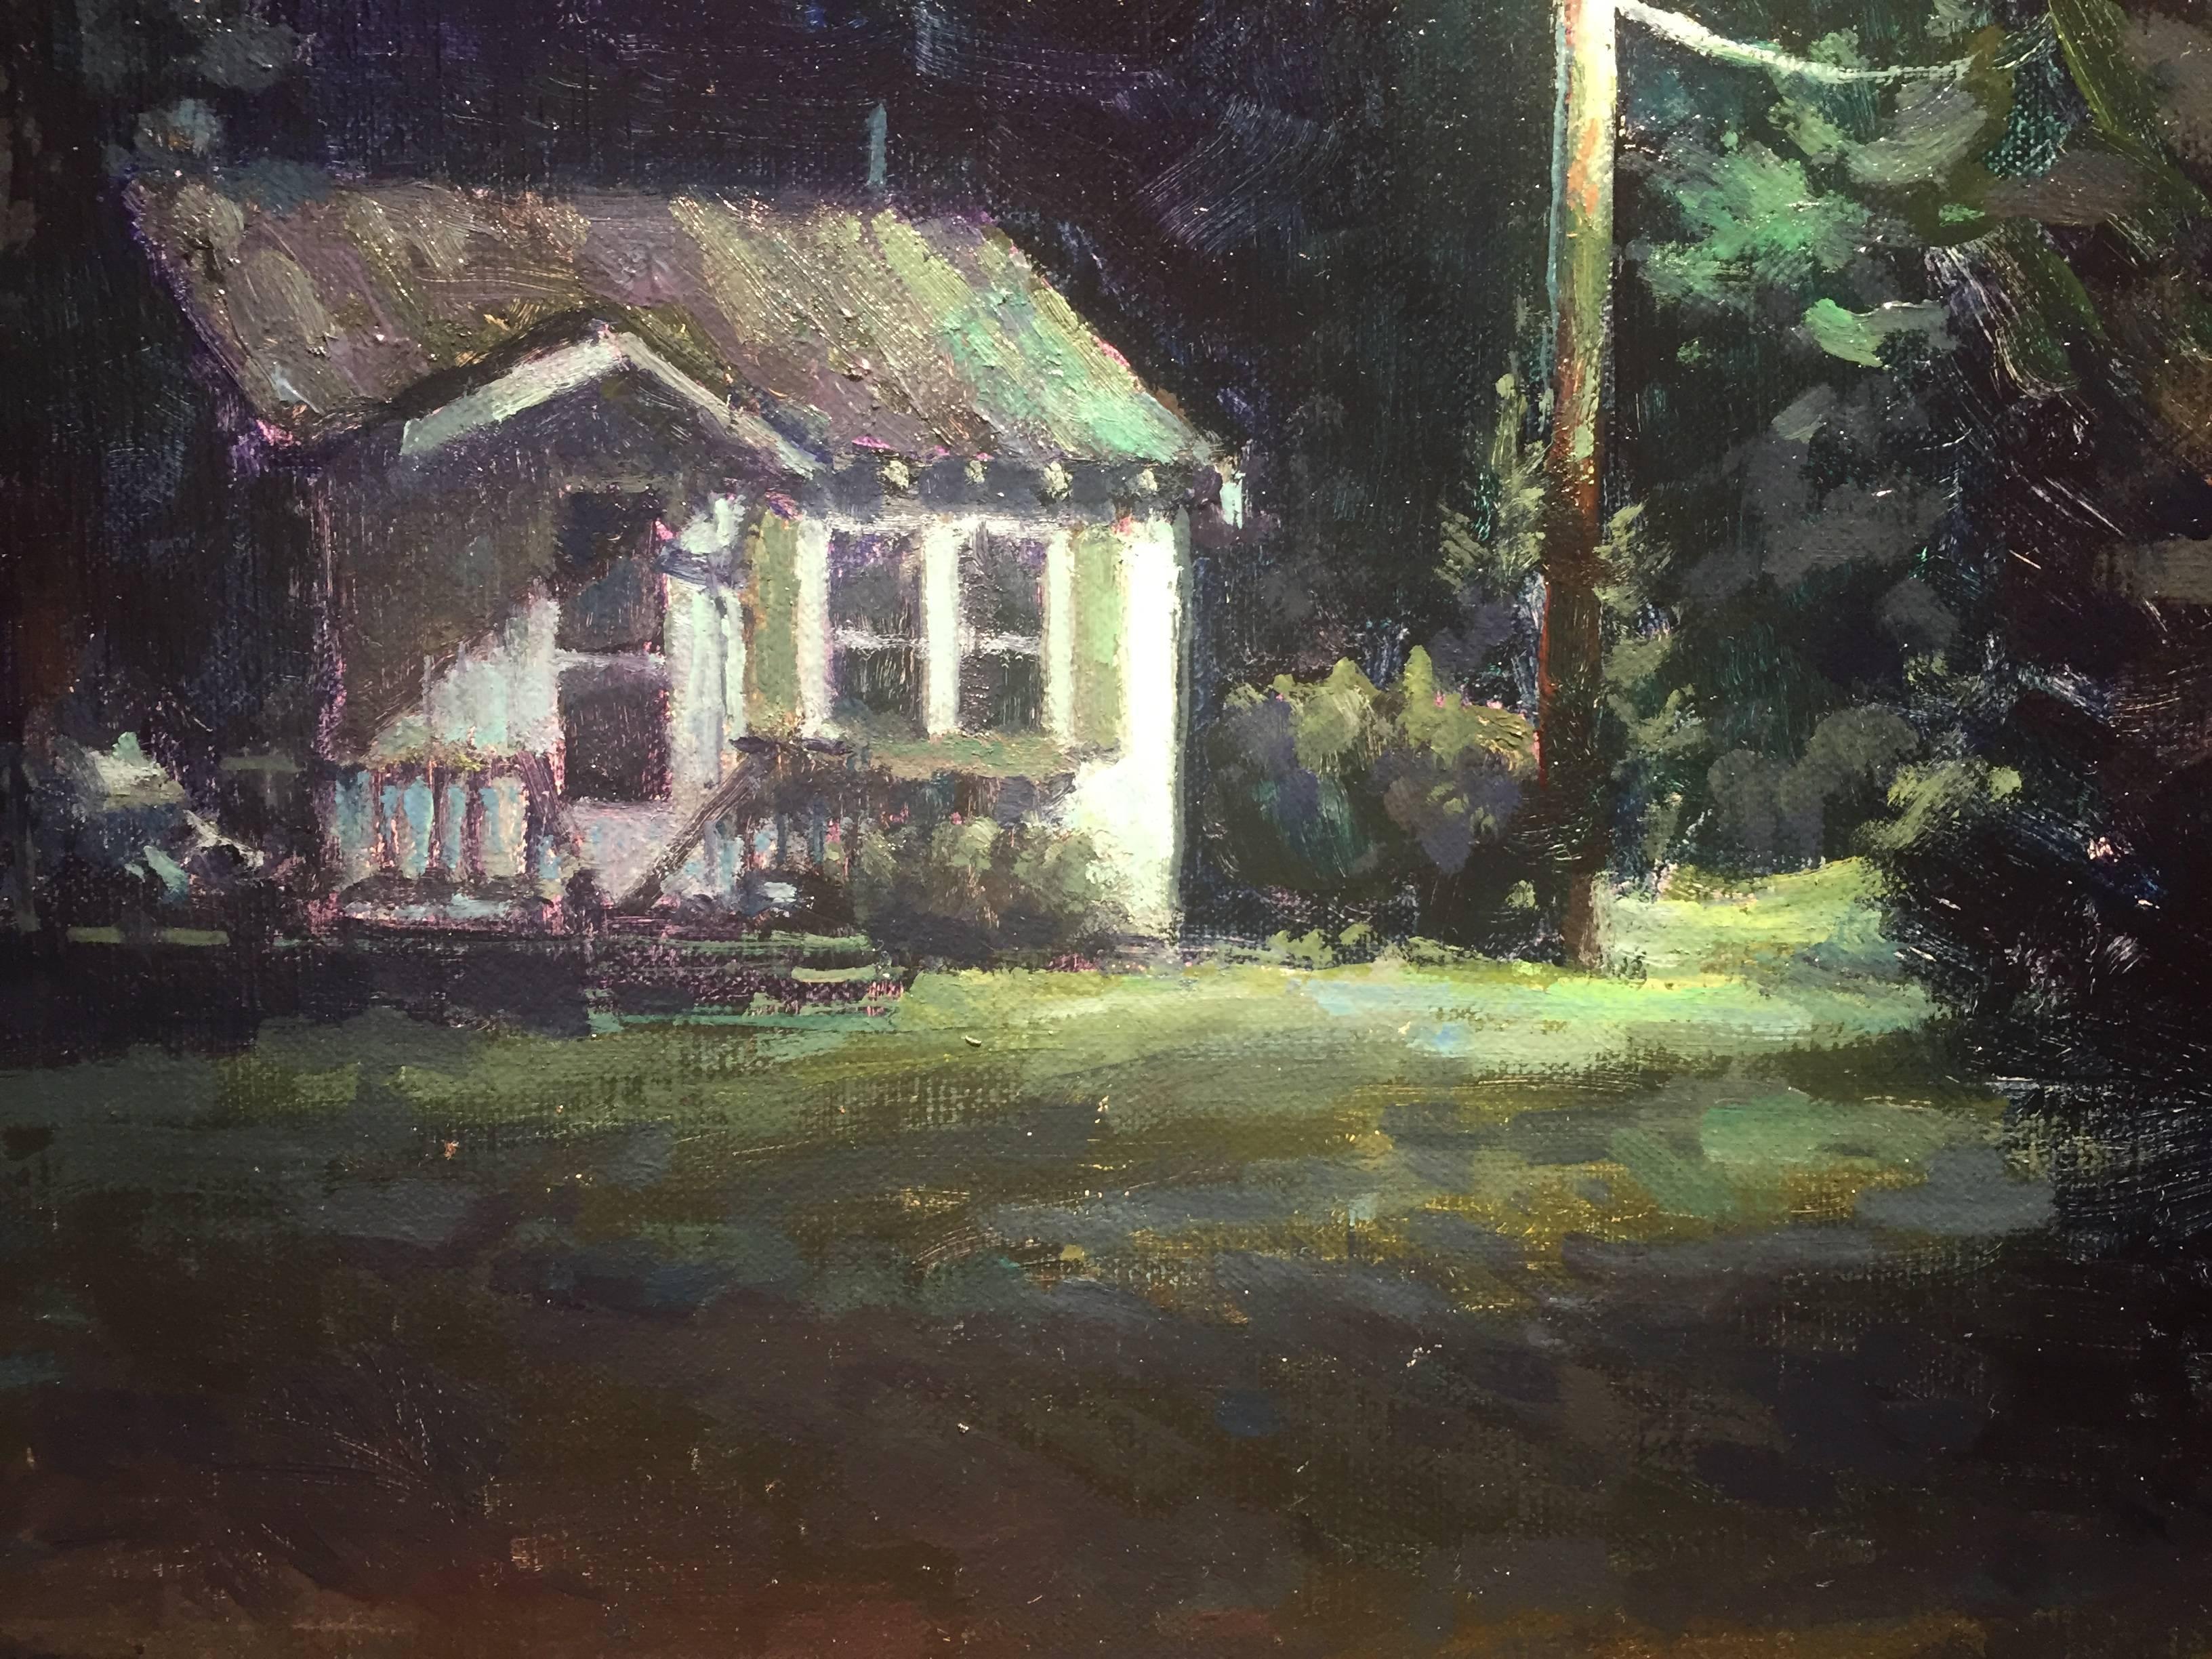 Painted en plein-air, at night. A small white house stands illuminated by an adjacent street-light. A thick dab of white paint creates an illusion of a distant light, so bright it reveals the region around it. A hue of green glistens off every inch